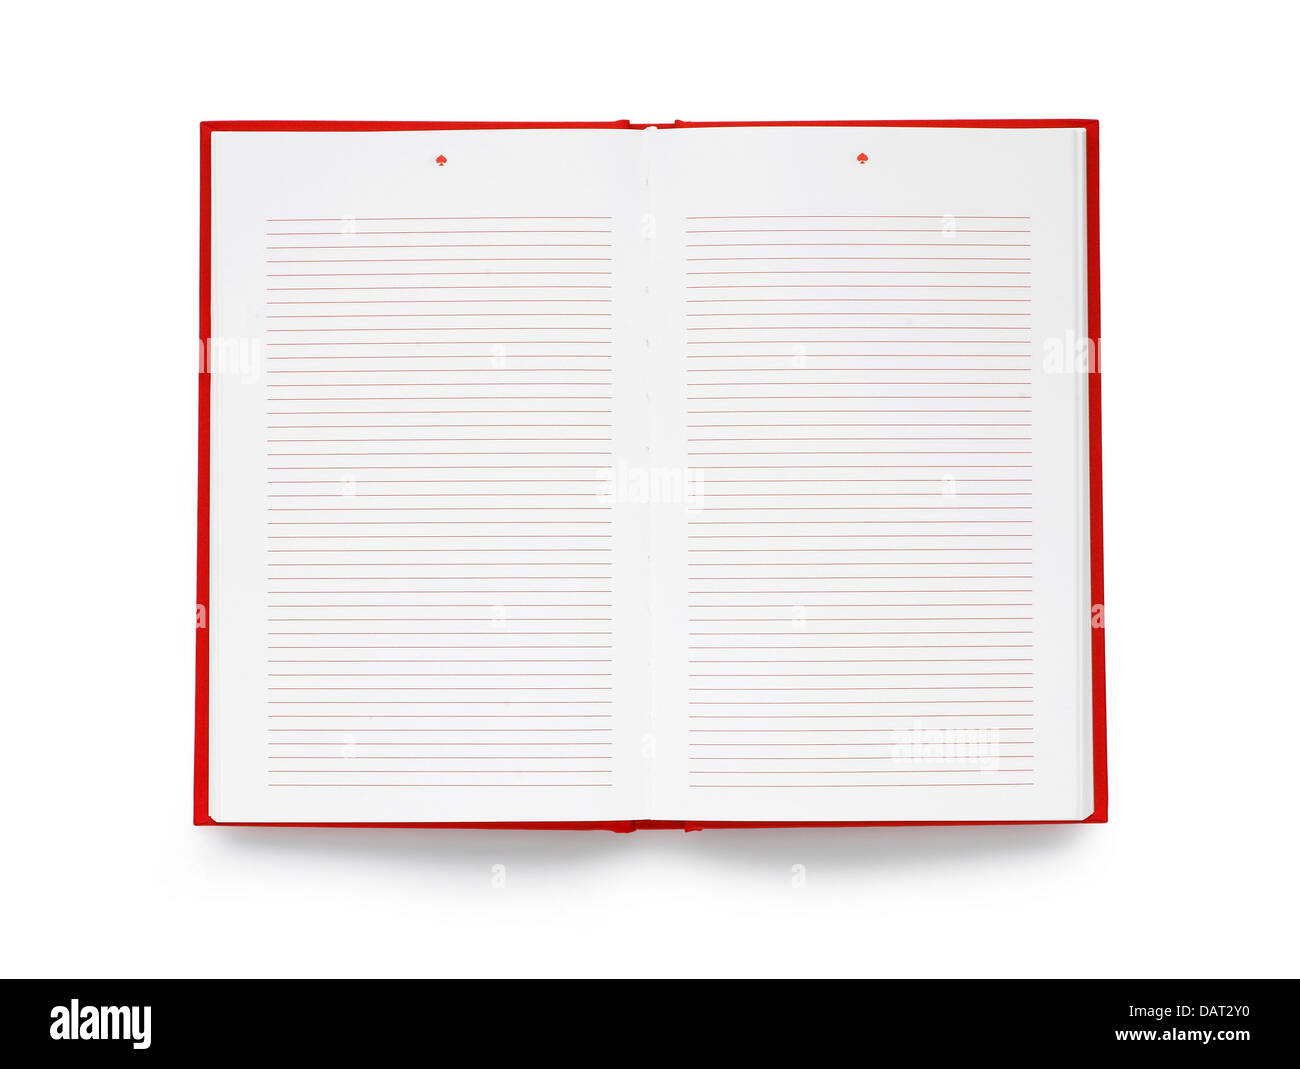 blank liked diary notebook cut out onto a white background Stock Photo